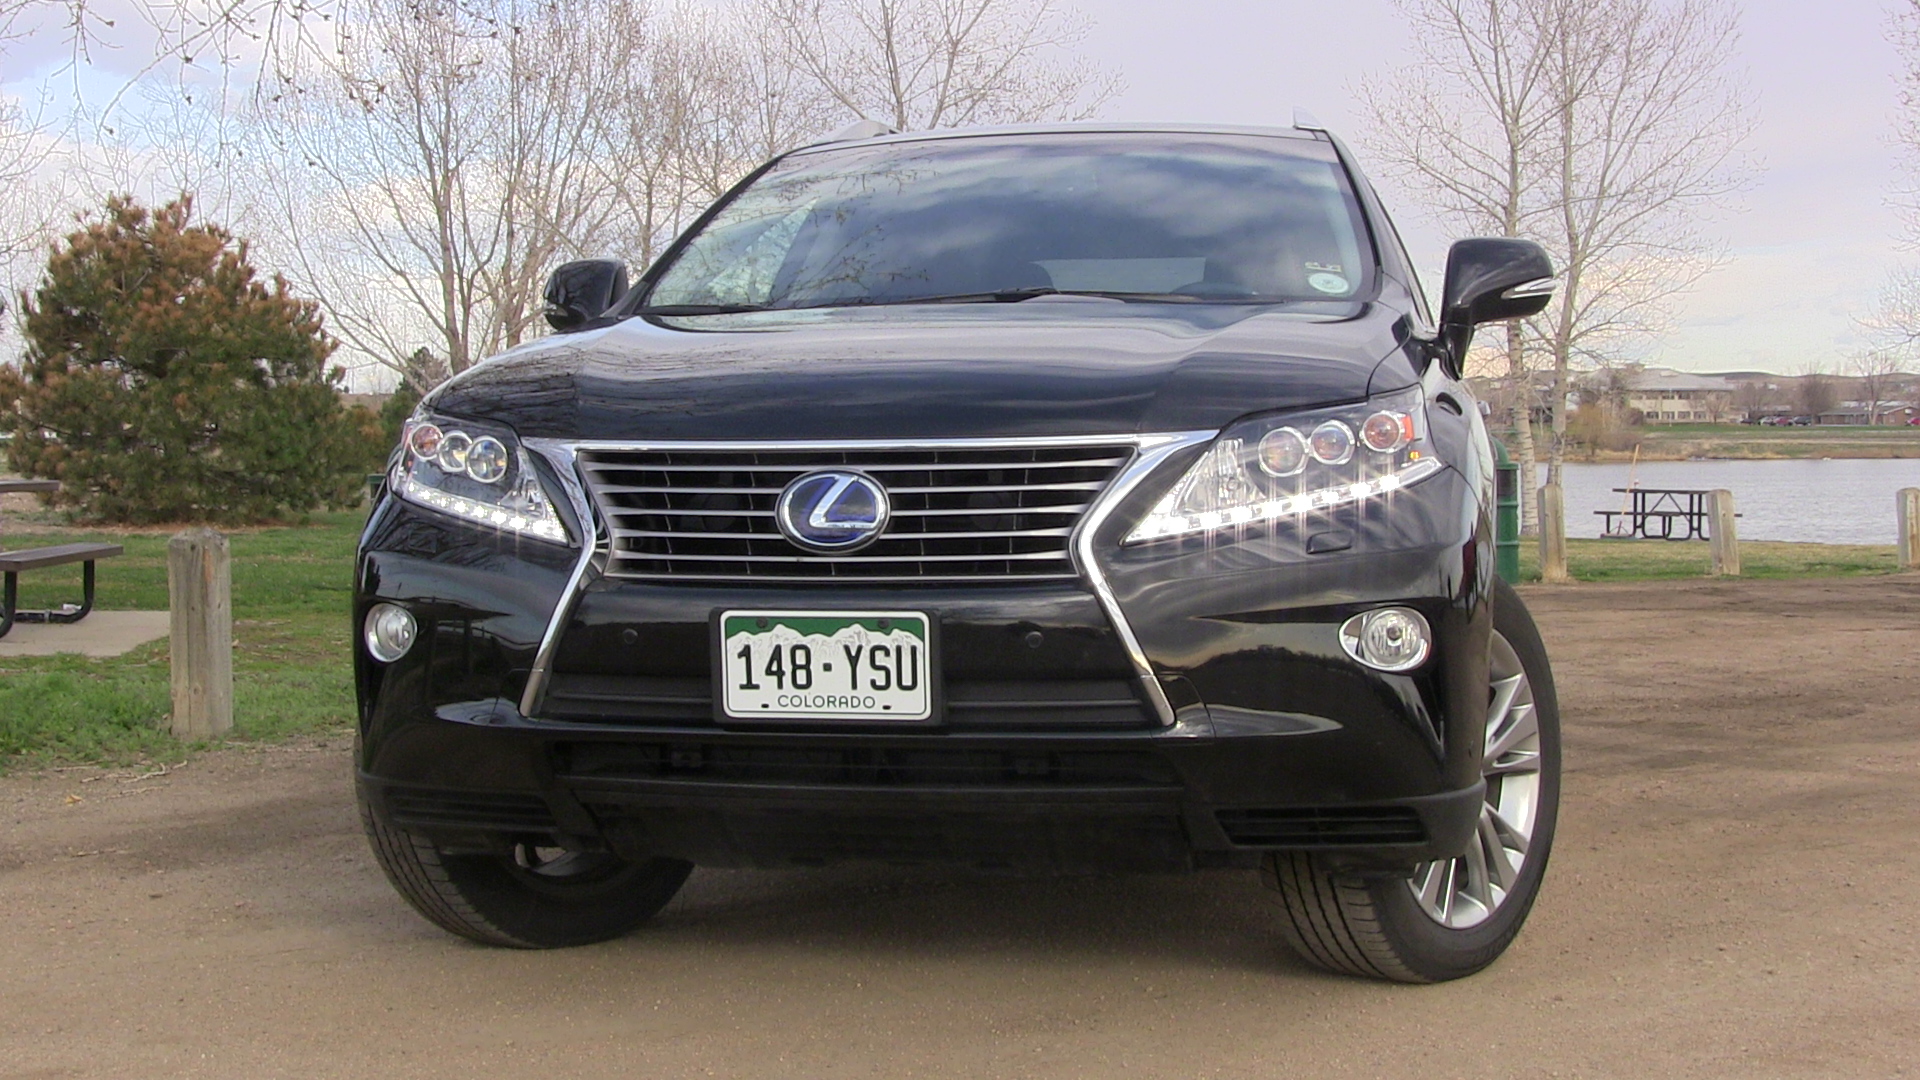 2014 Lexus RX 450h - Hybrid of AWD Luxury [review] - The Fast Lane Car